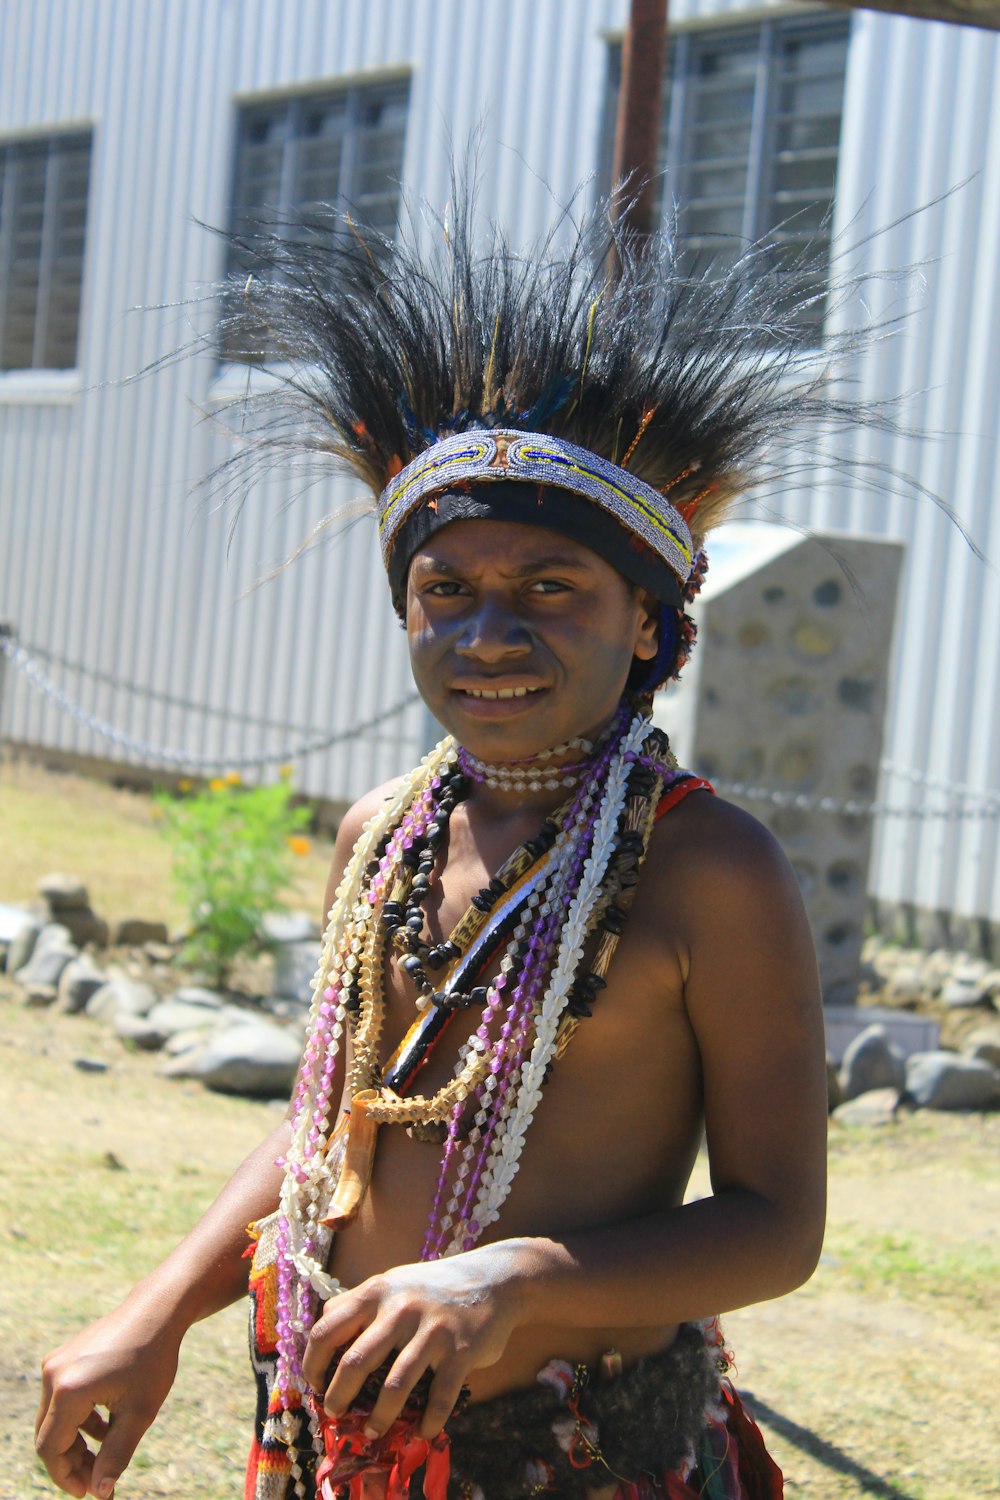 a native american man wearing a headdress and beads